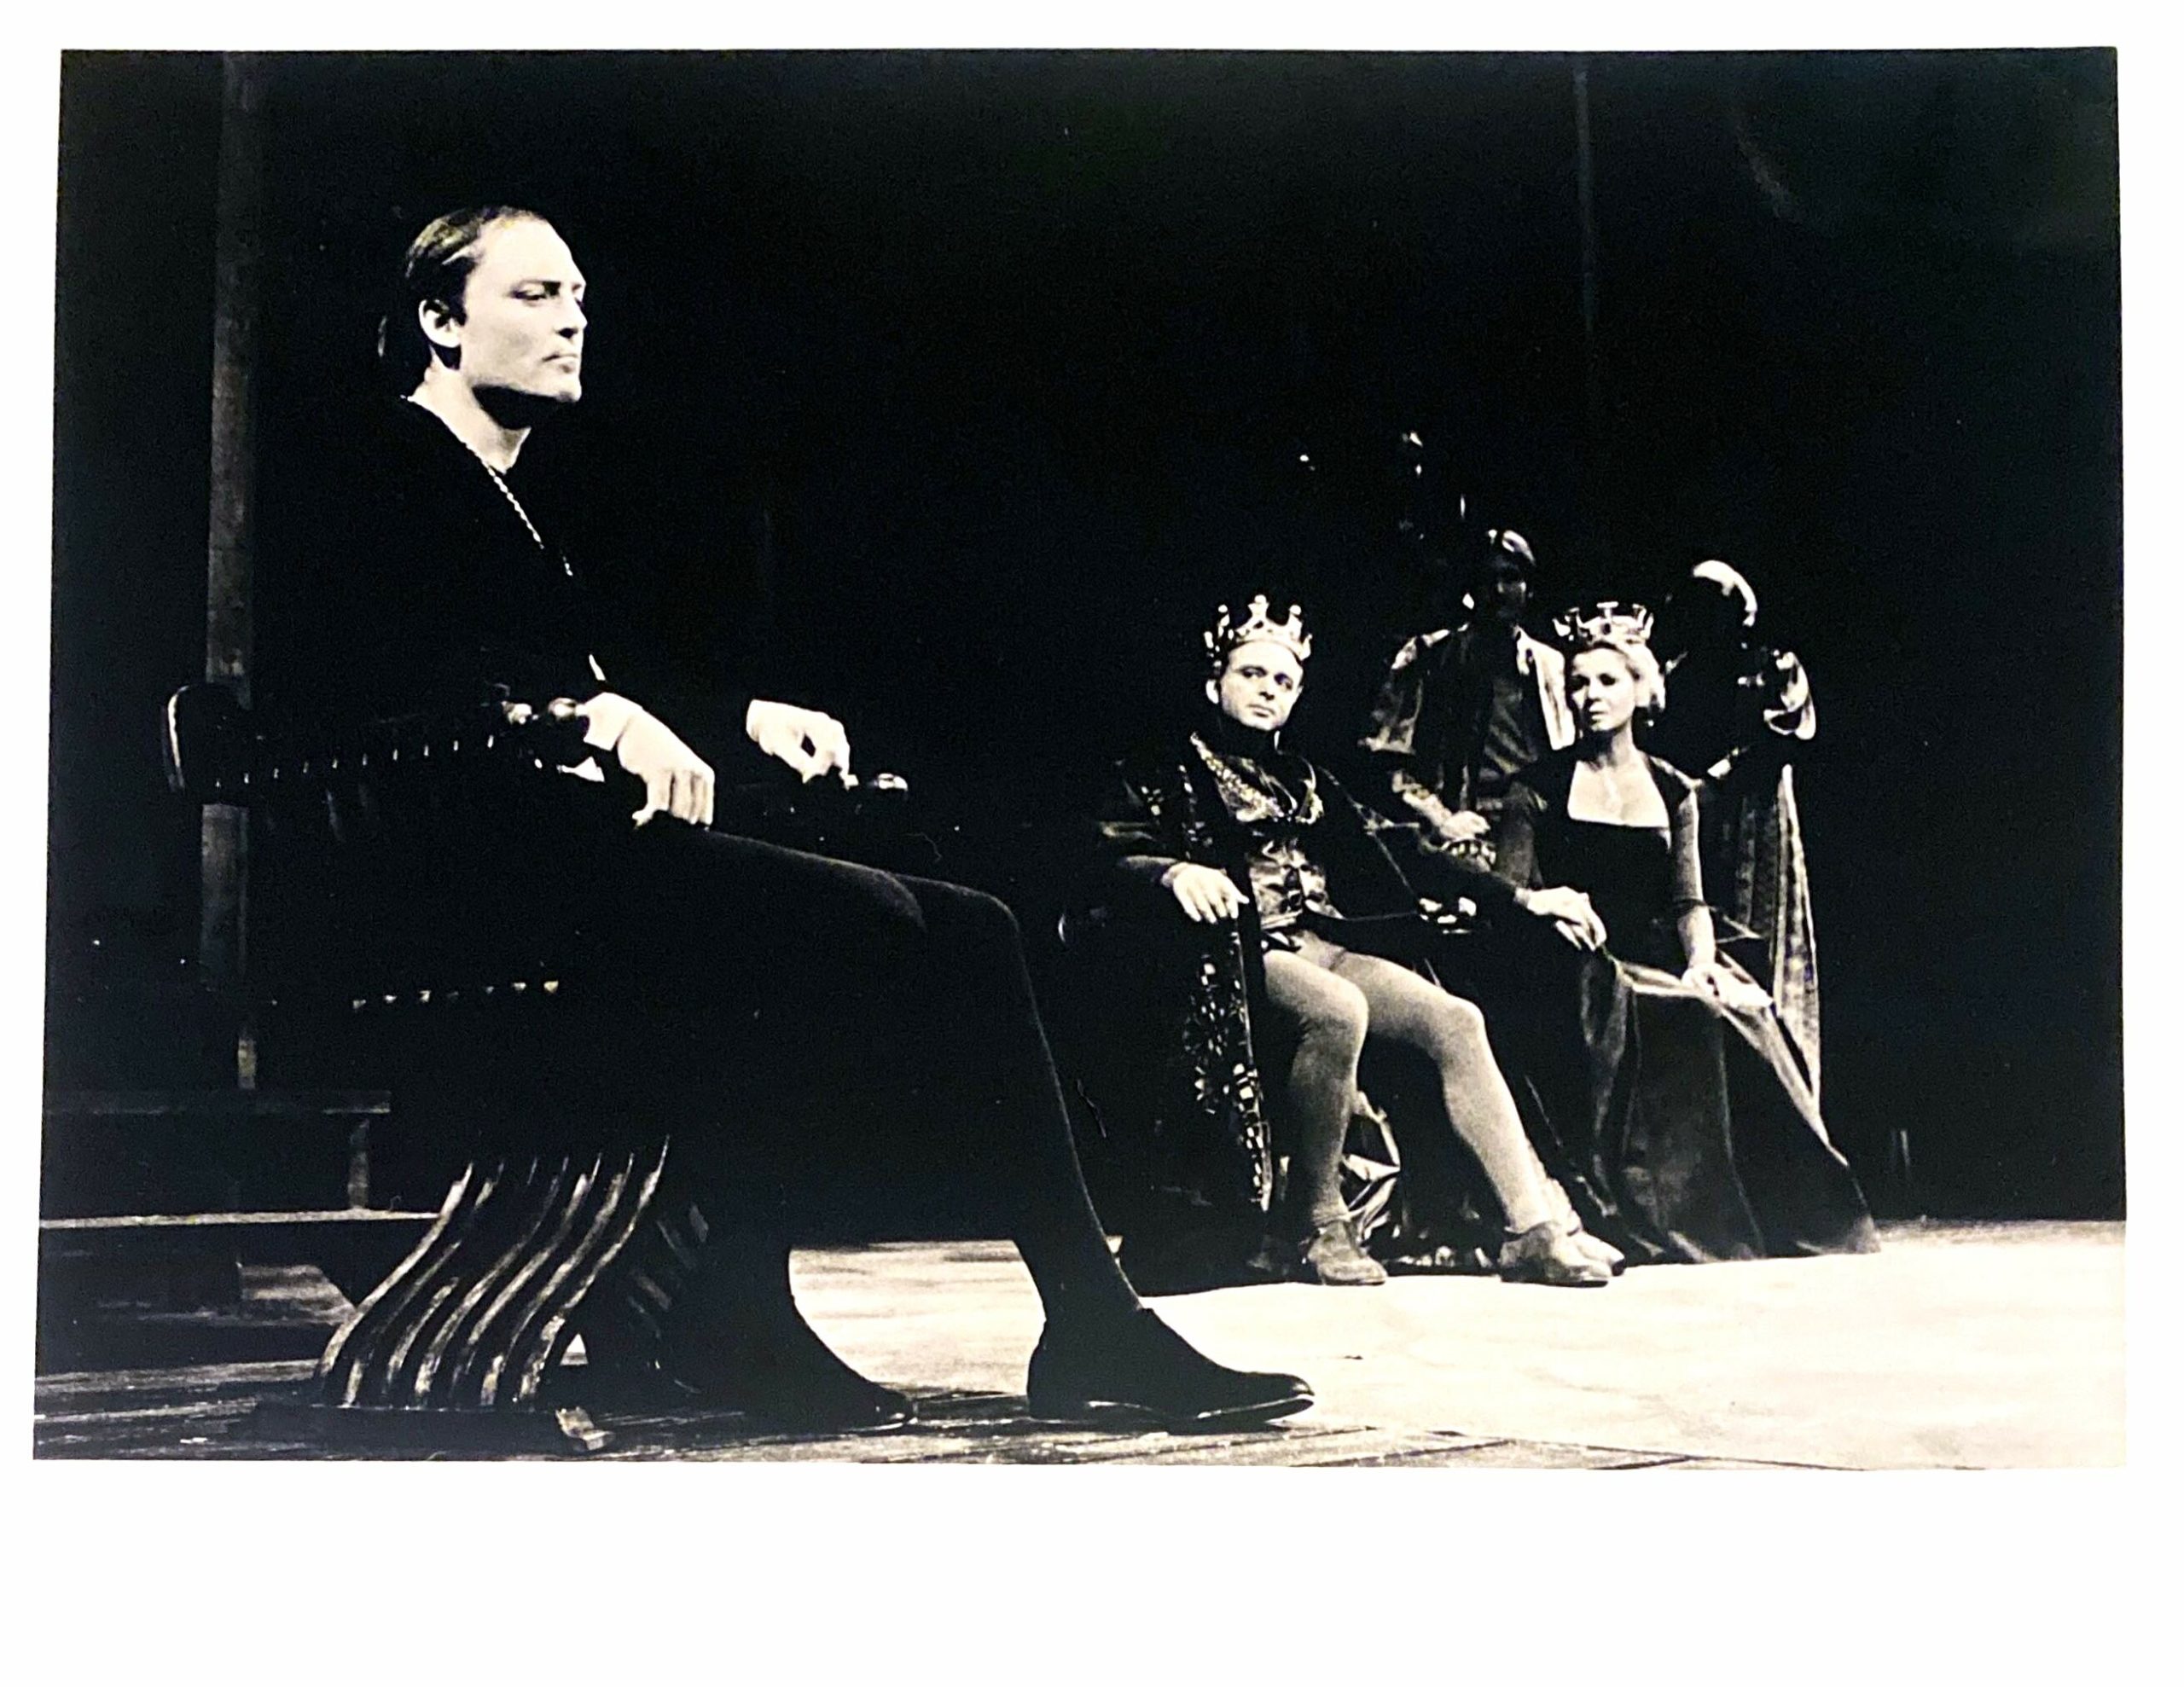 Harris Yulin, second from left, in 